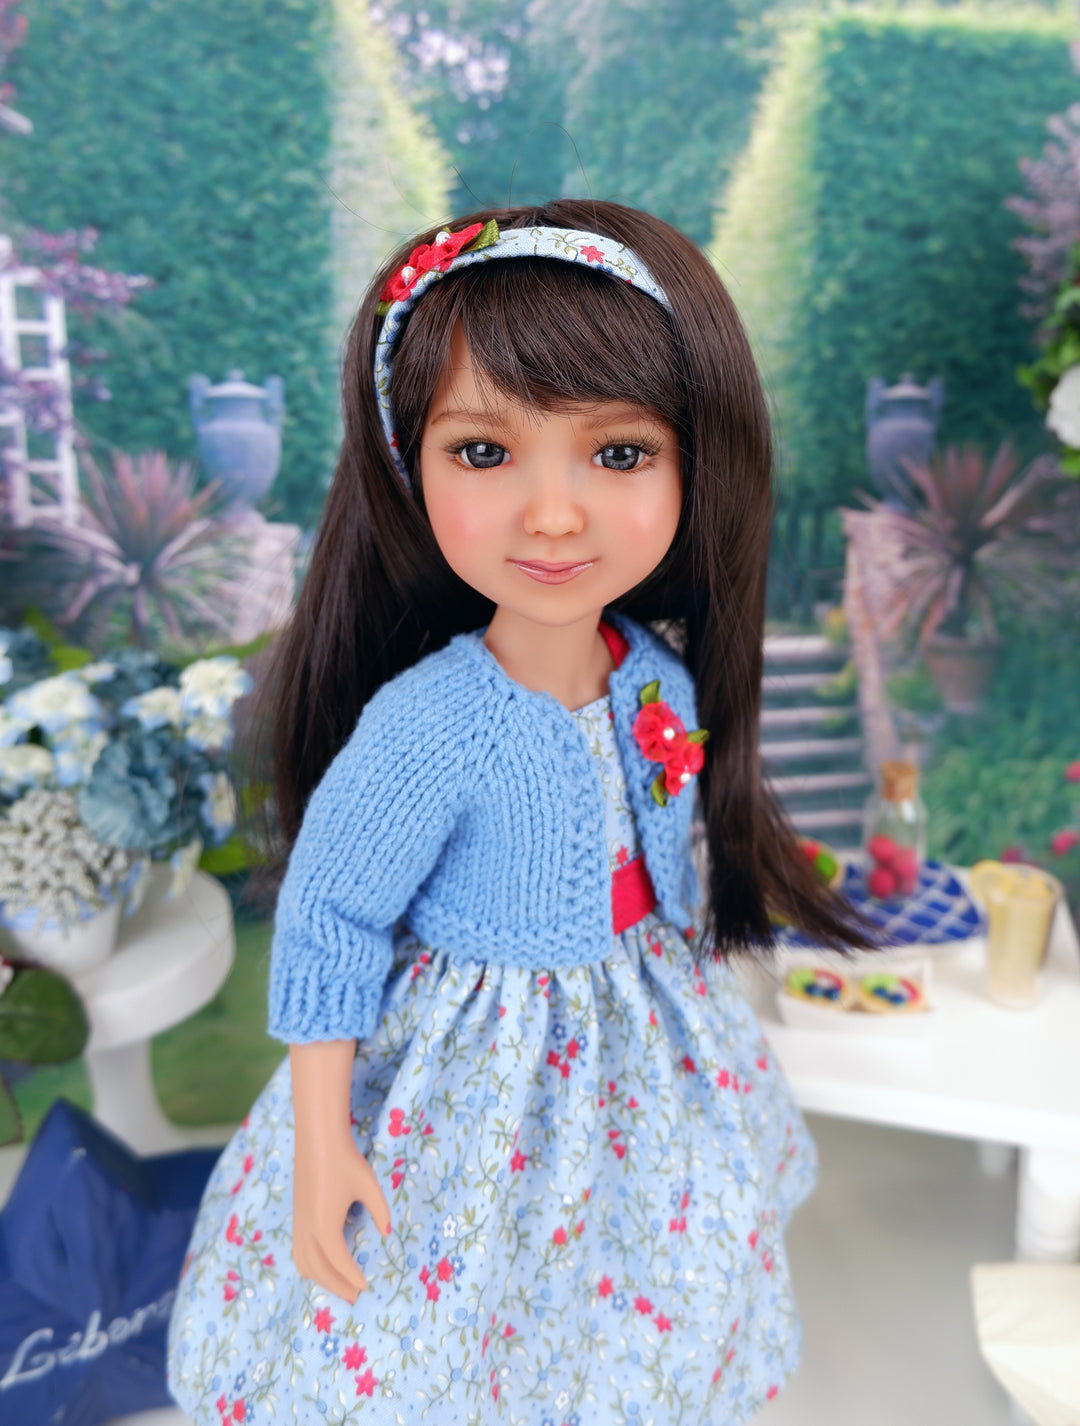 Liberty Garden - dress and sweater with shoes for Ruby Red Fashion Friends doll